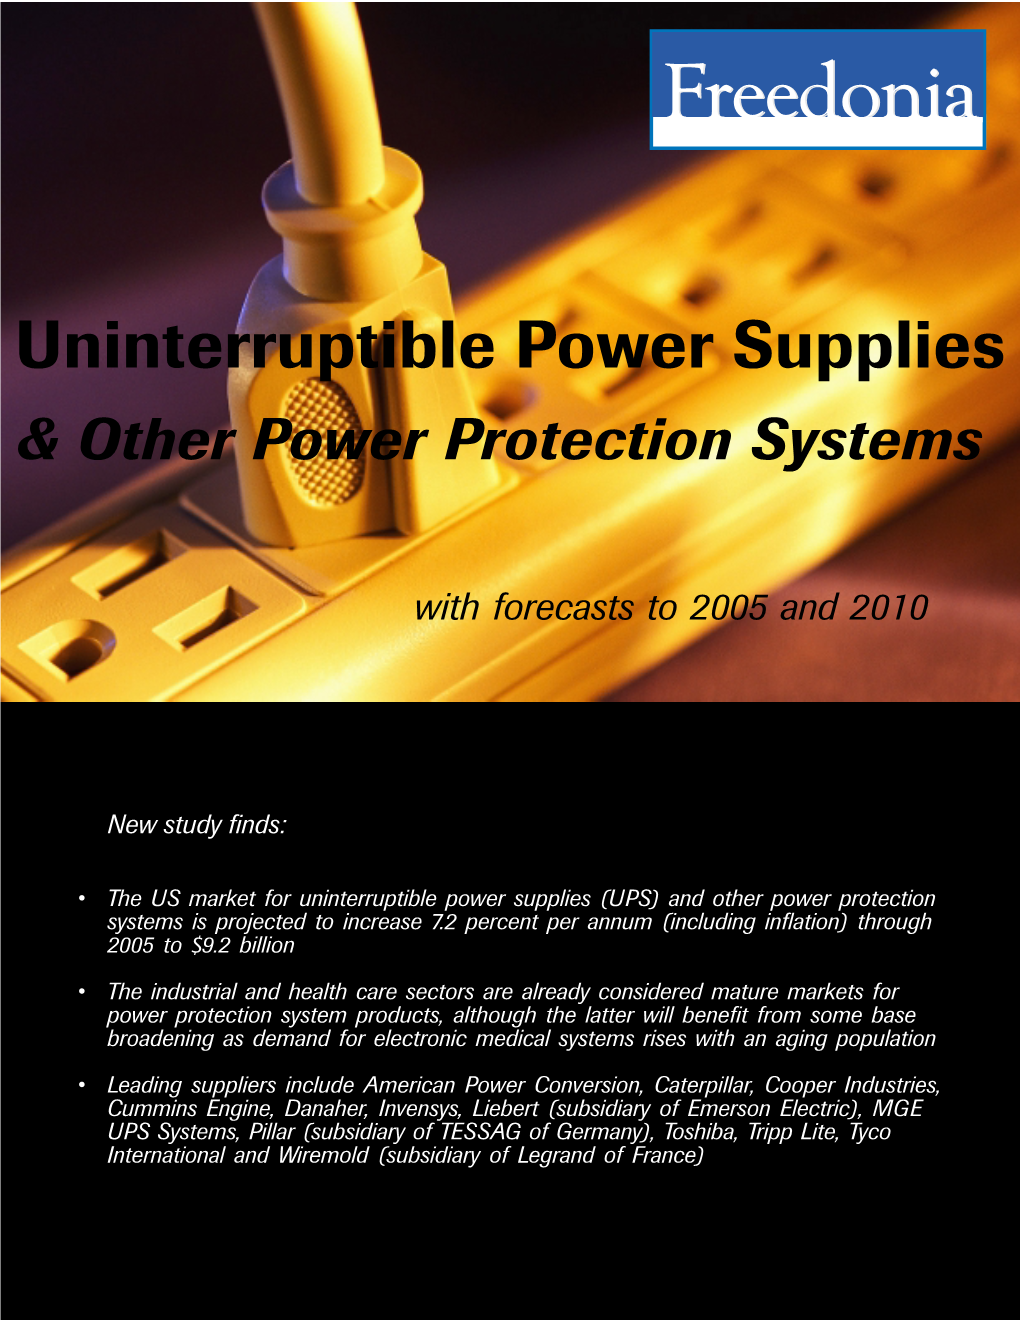 Uninterruptible Power Supplies & Other Power Protection Systems